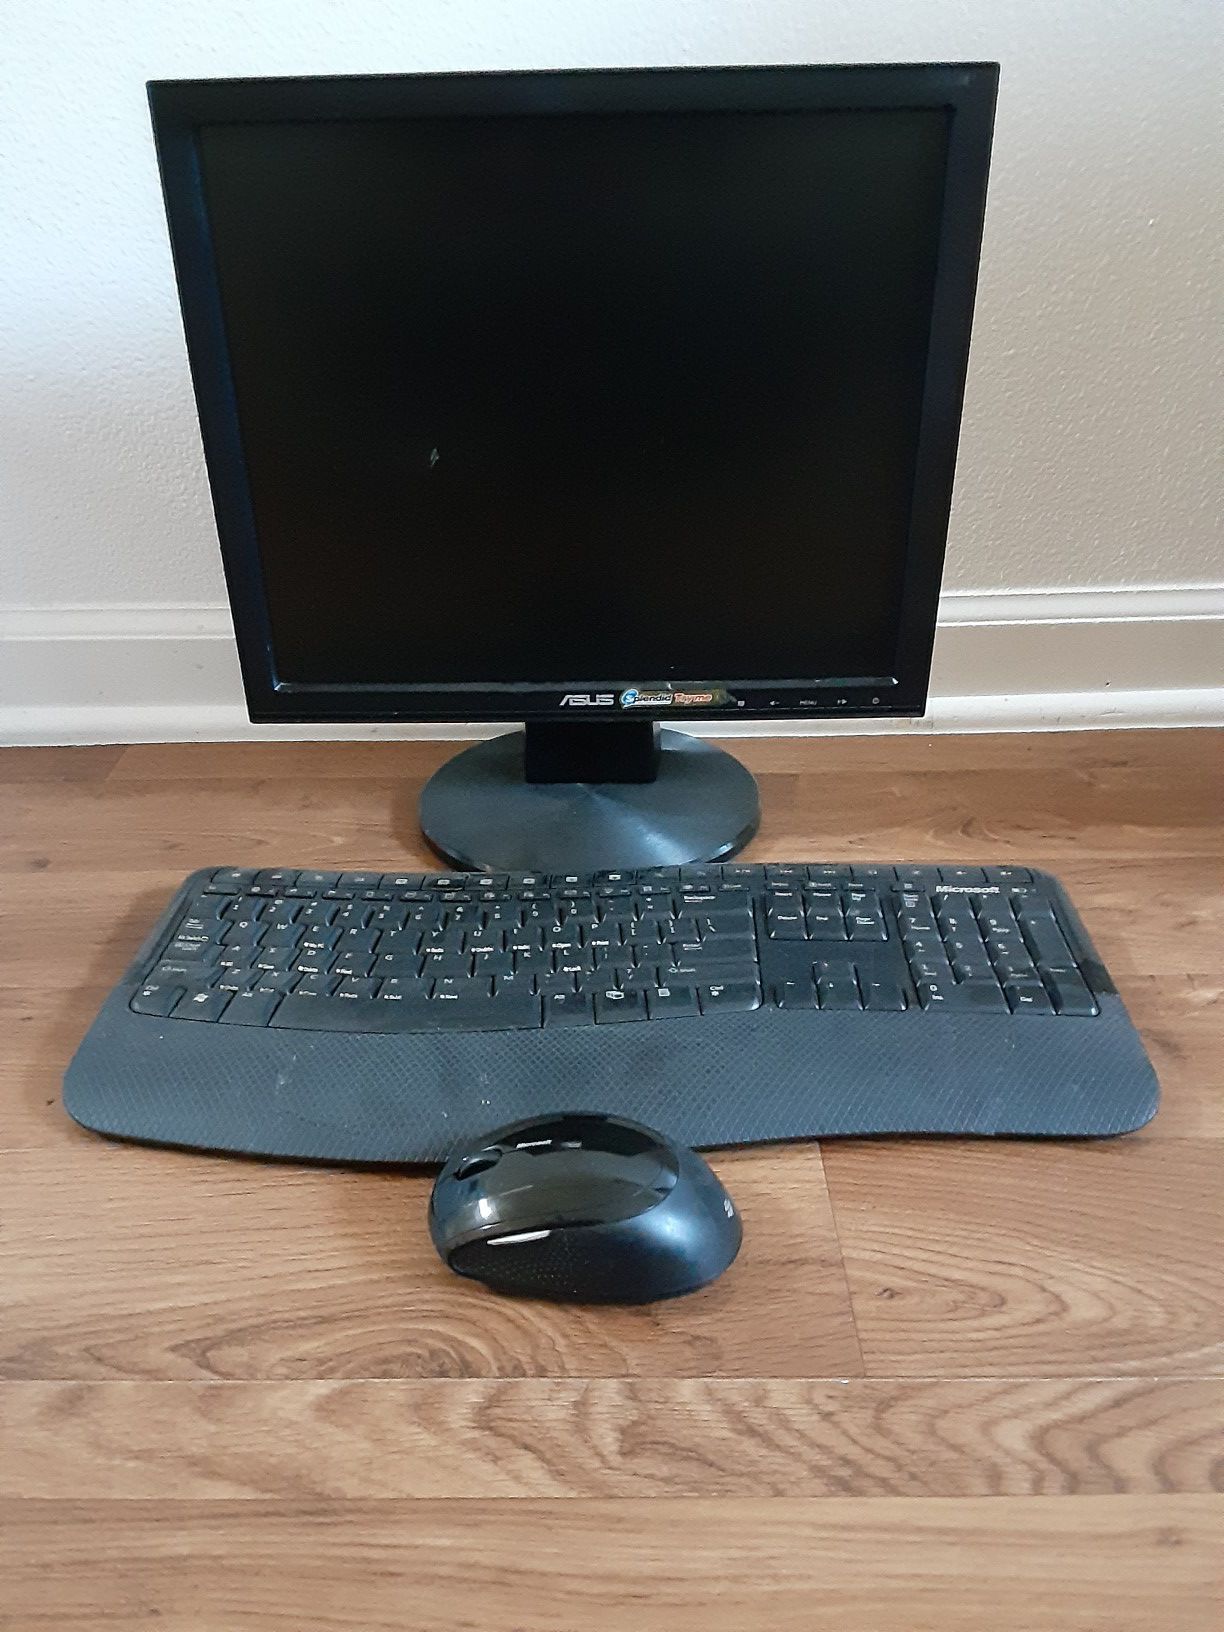 Computer screen, keyboard & wireless mouse with USB